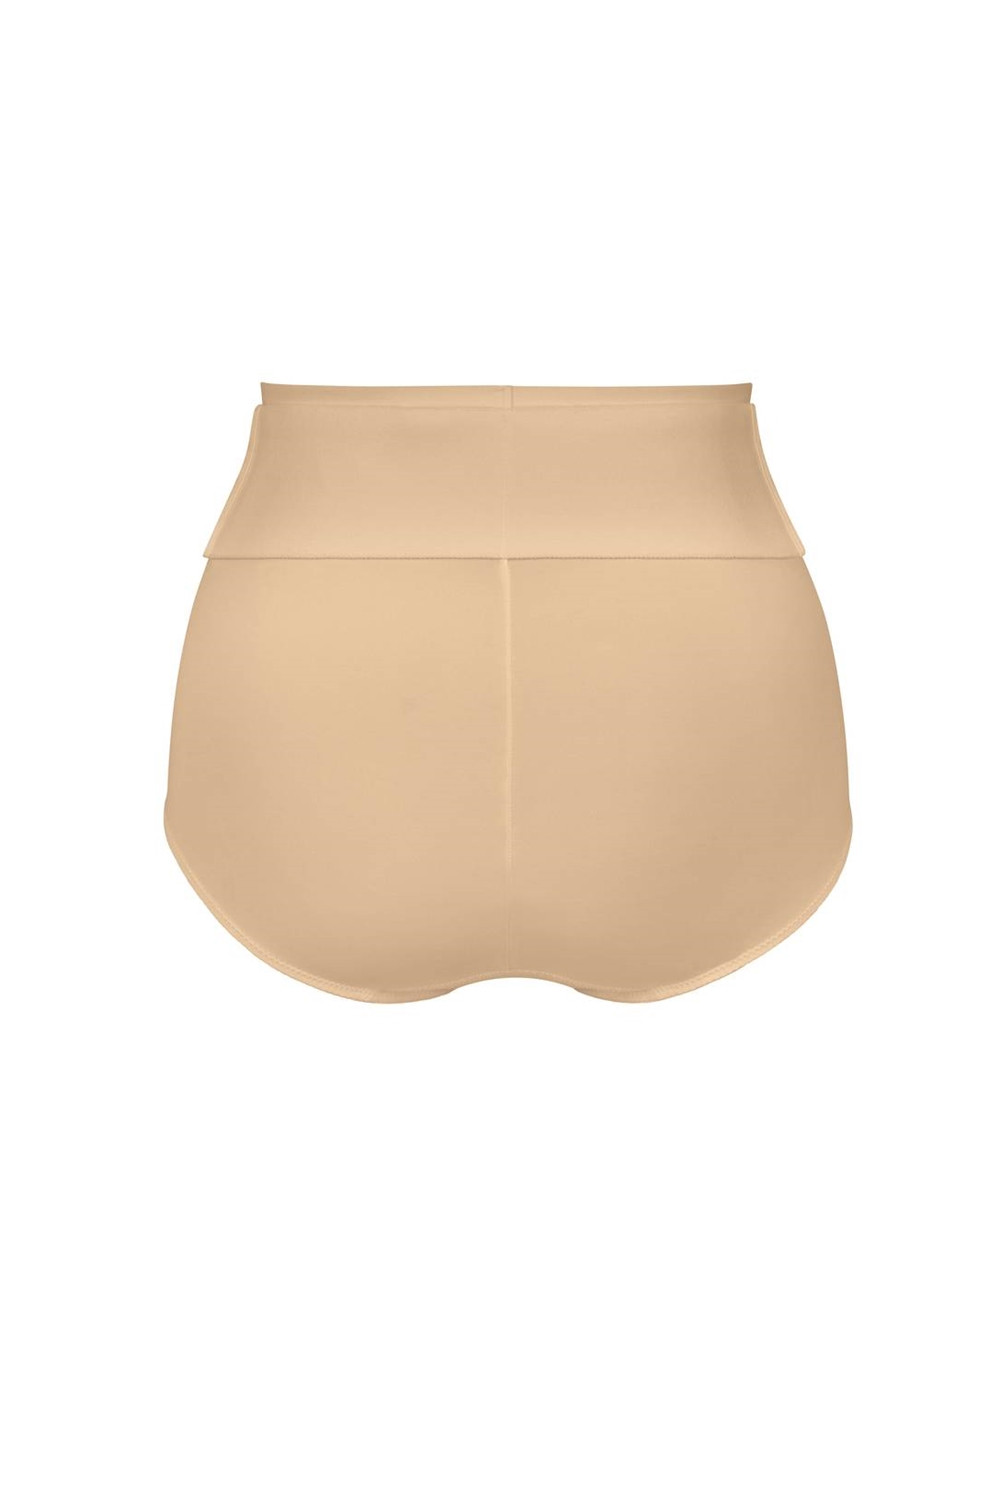 Hip shaping panty girdle made of microfiber and firm fabric